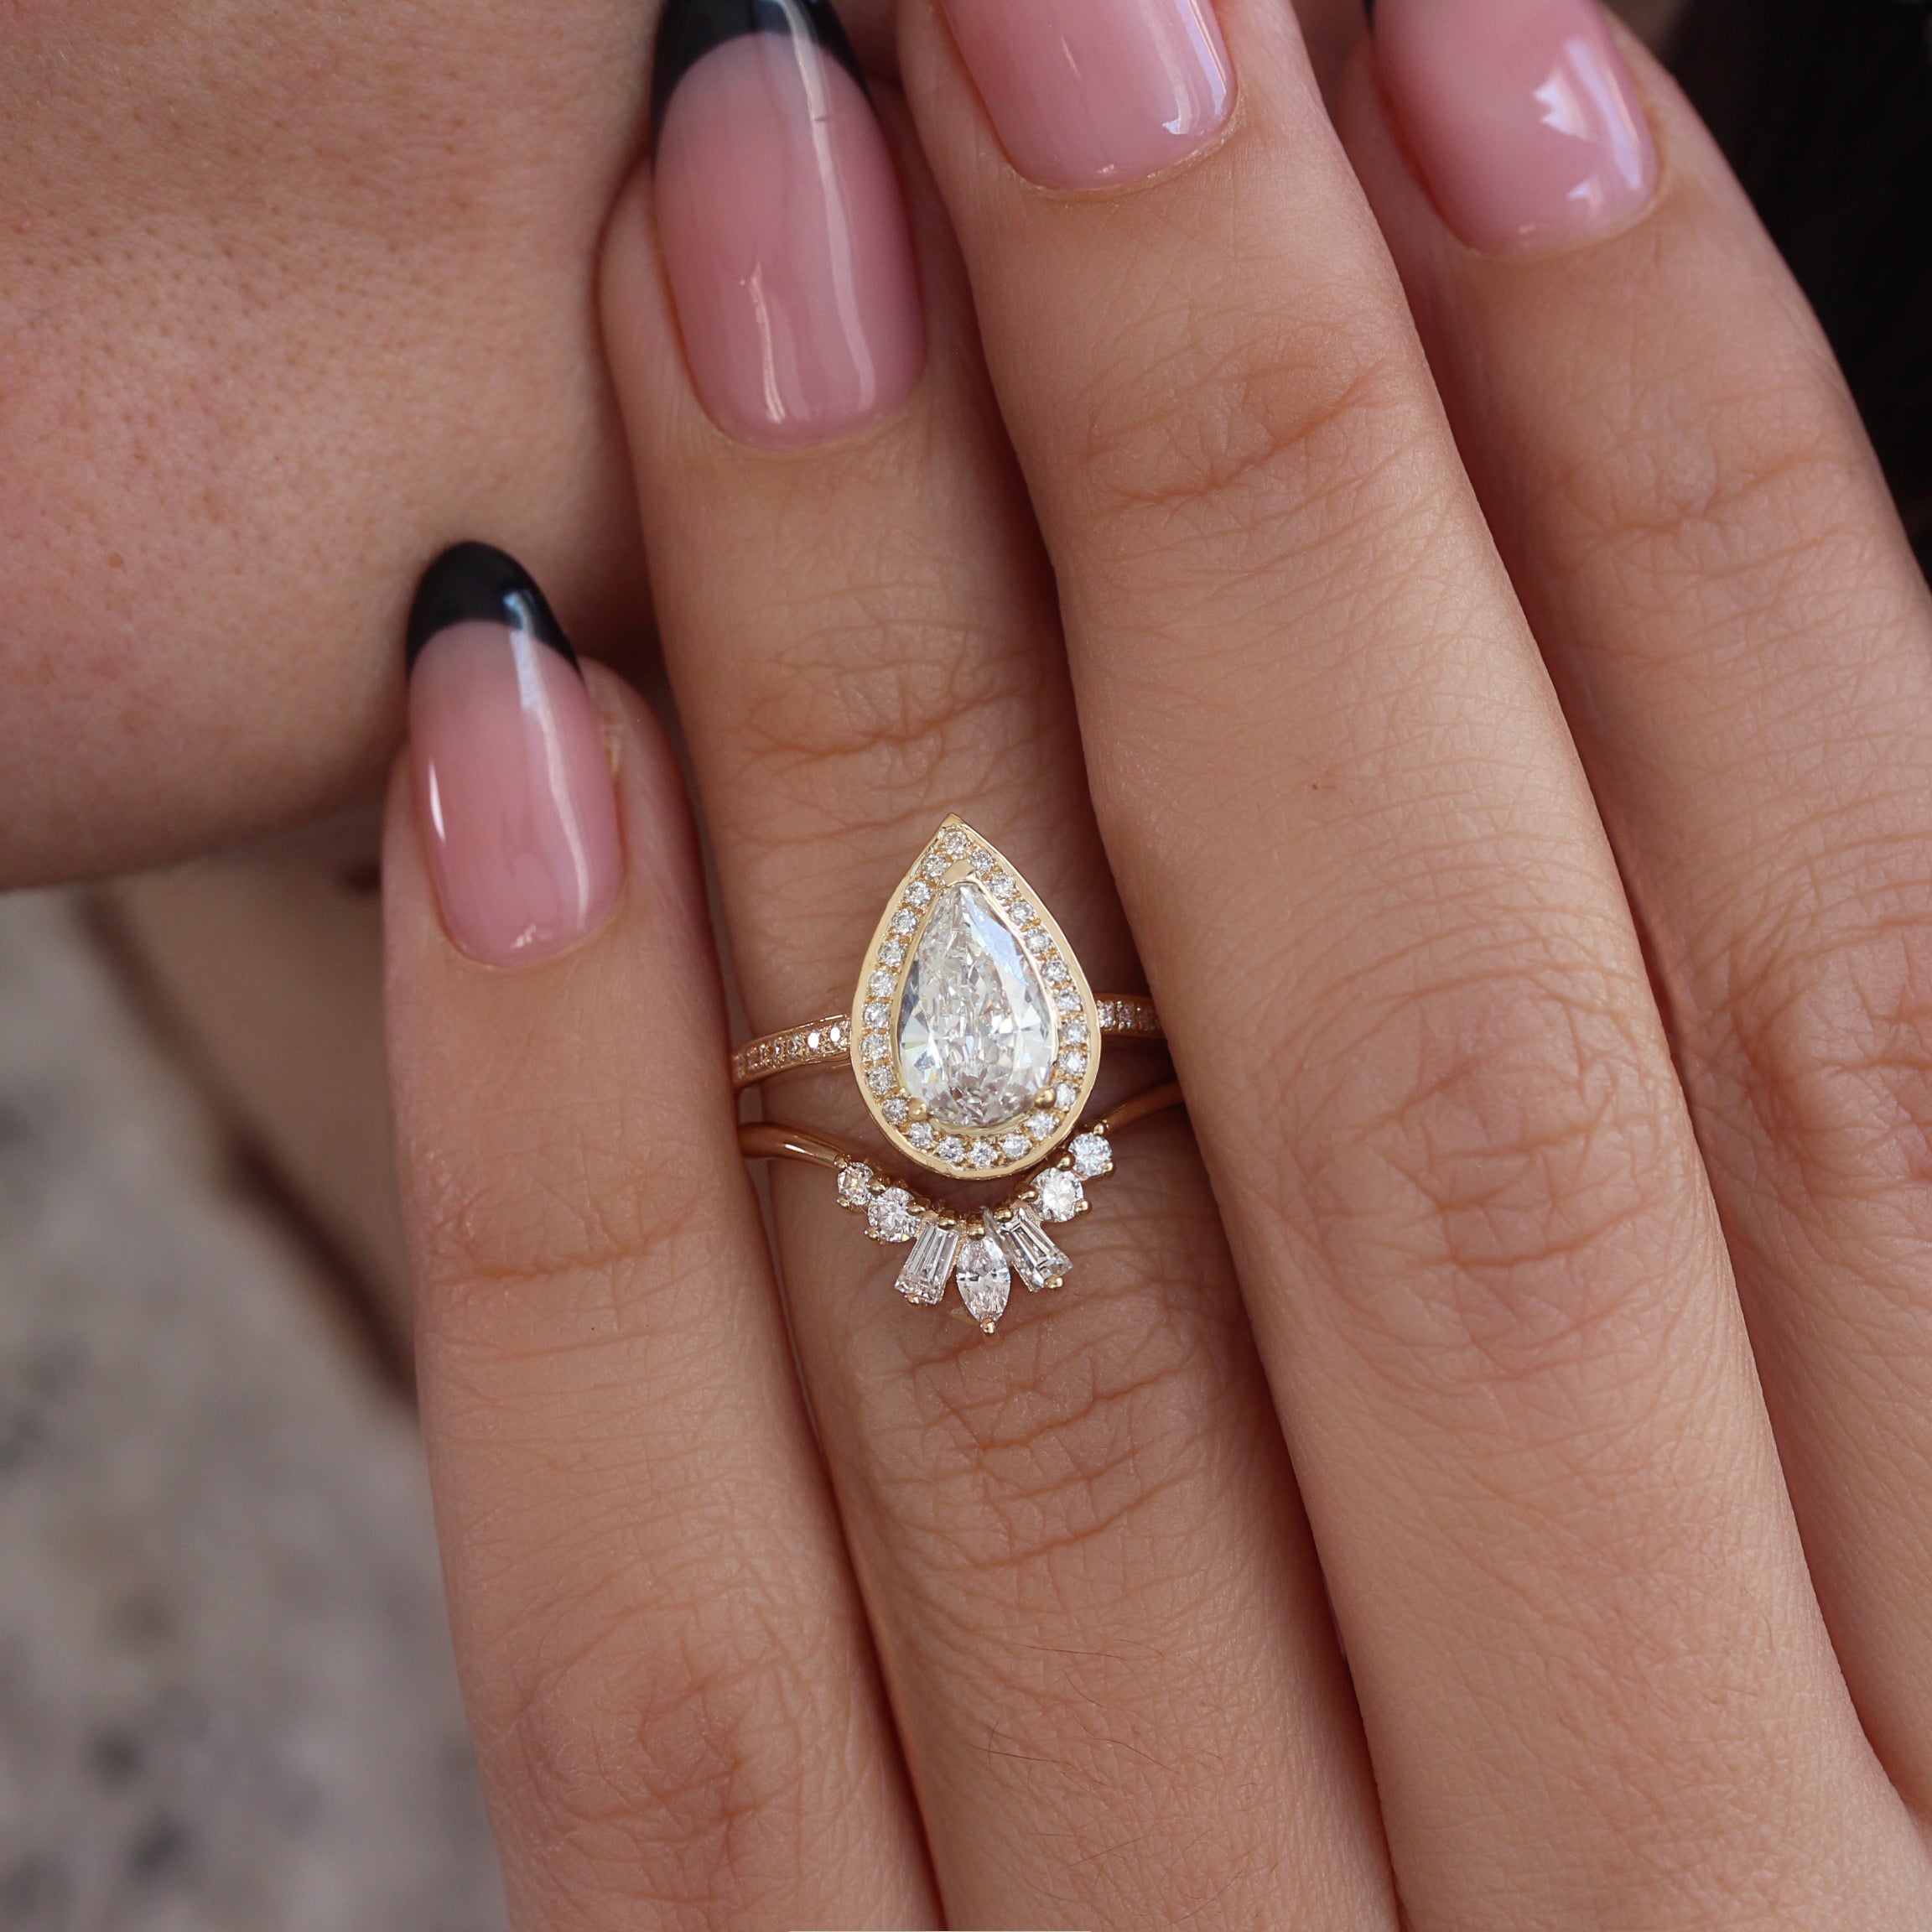 Pear Diamond Engagement Ring With Nesting Sideband, Bridal Two Rings Set - "Nia" & "Ally V"